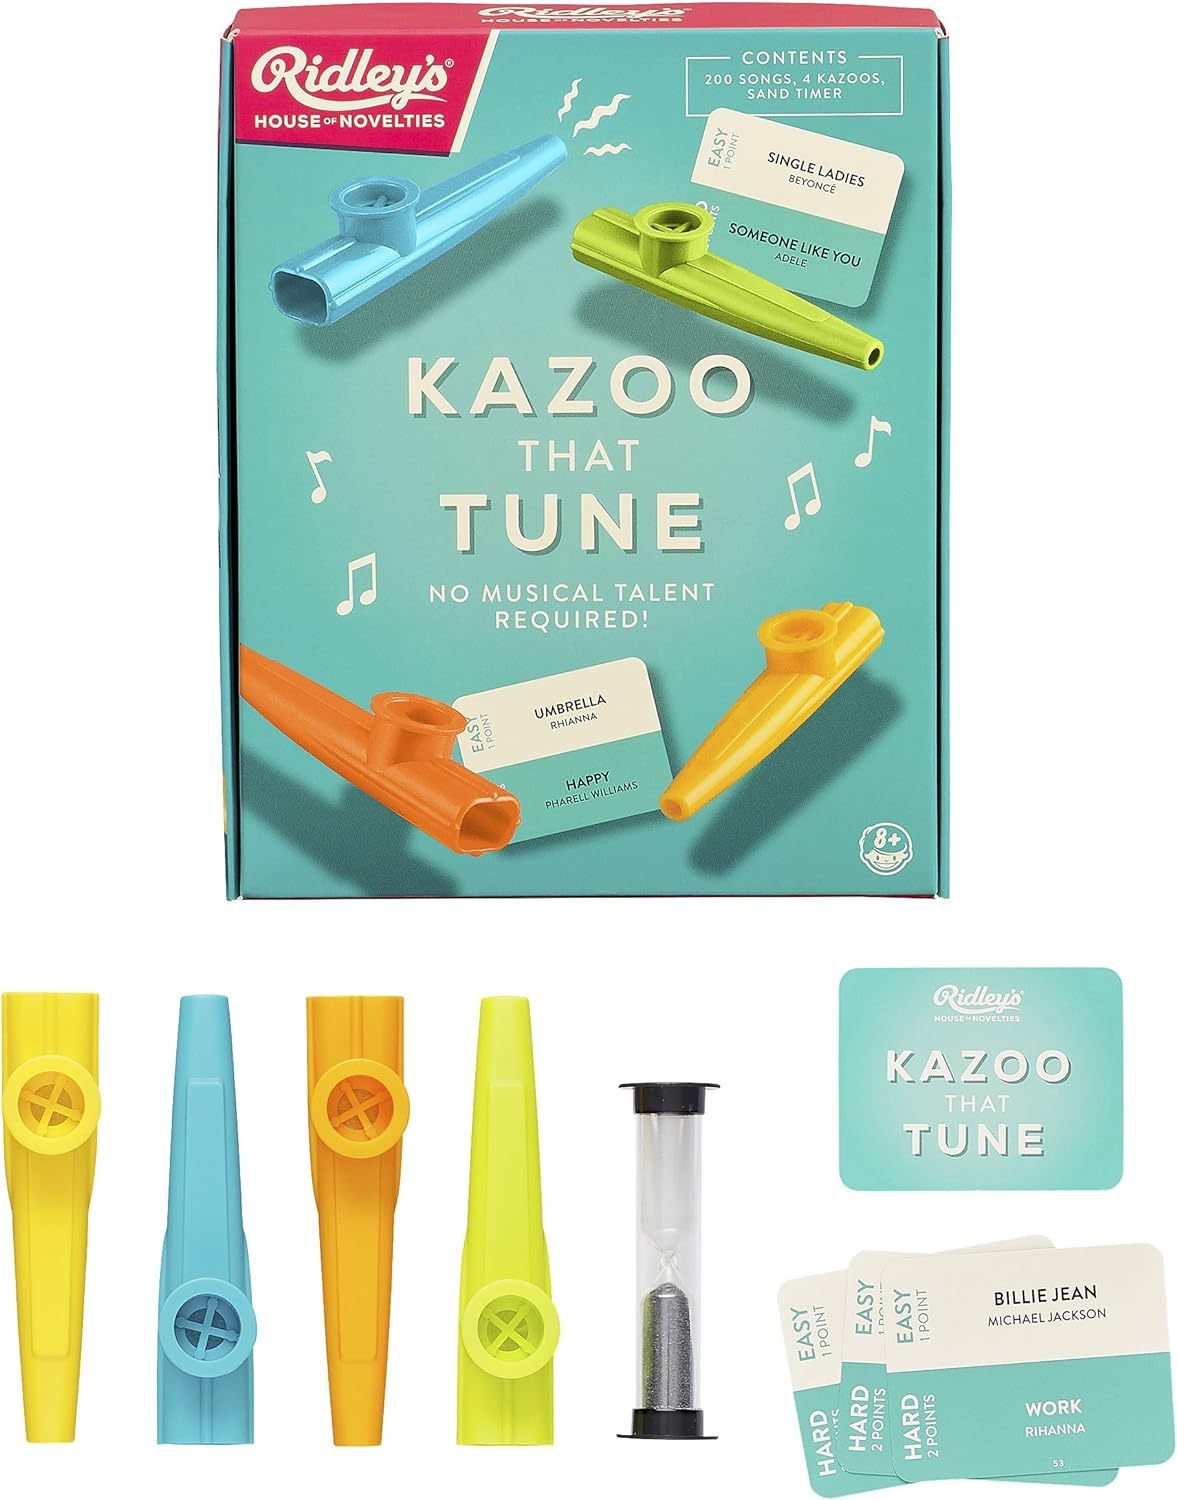 🔥POPULAR 🔥 It’s sort of a mash up of Pictionary (sans pictures) and Name That Tune… but add kazoos. Kazoo That Tune is all about music and some seriously needed silliness. Comes with four kazoos, a sand timer, and 200 songs including a good amount of...